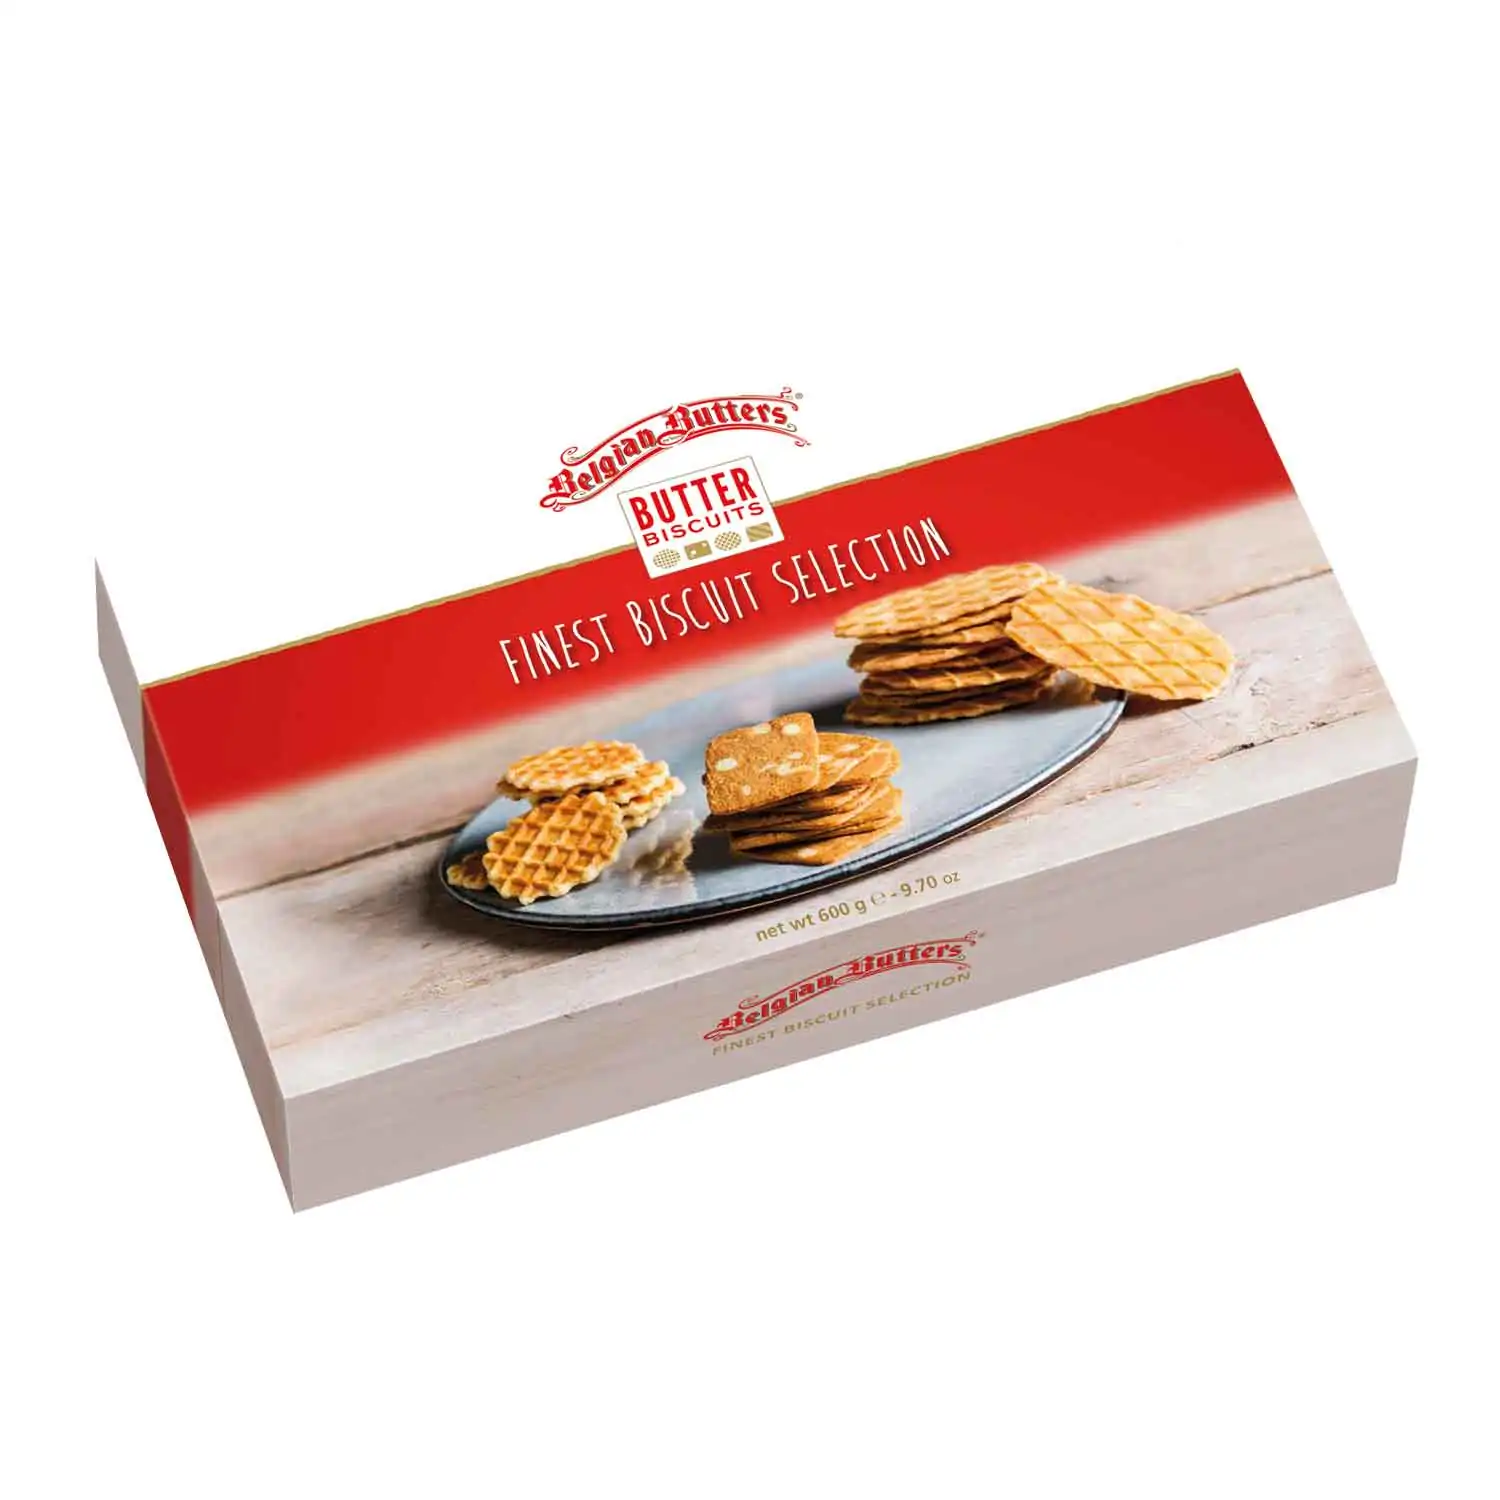 BB sélection biscuits au beurre 600g - Buy at Real Tobacco